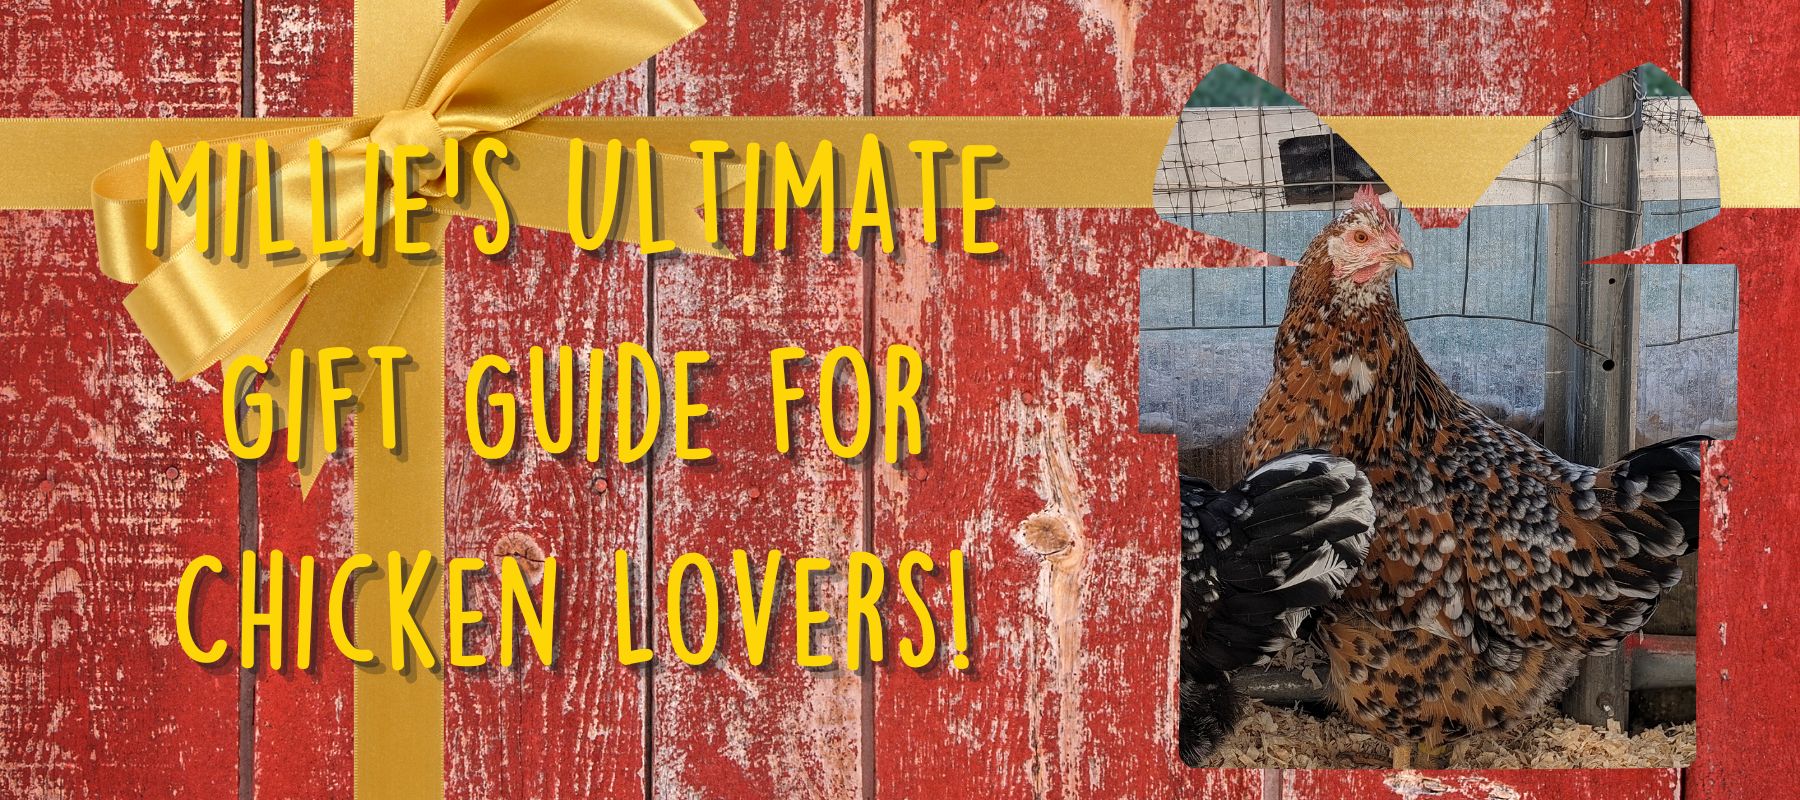 Millie's Ultimate Gift Guide for Chicken Lovers!